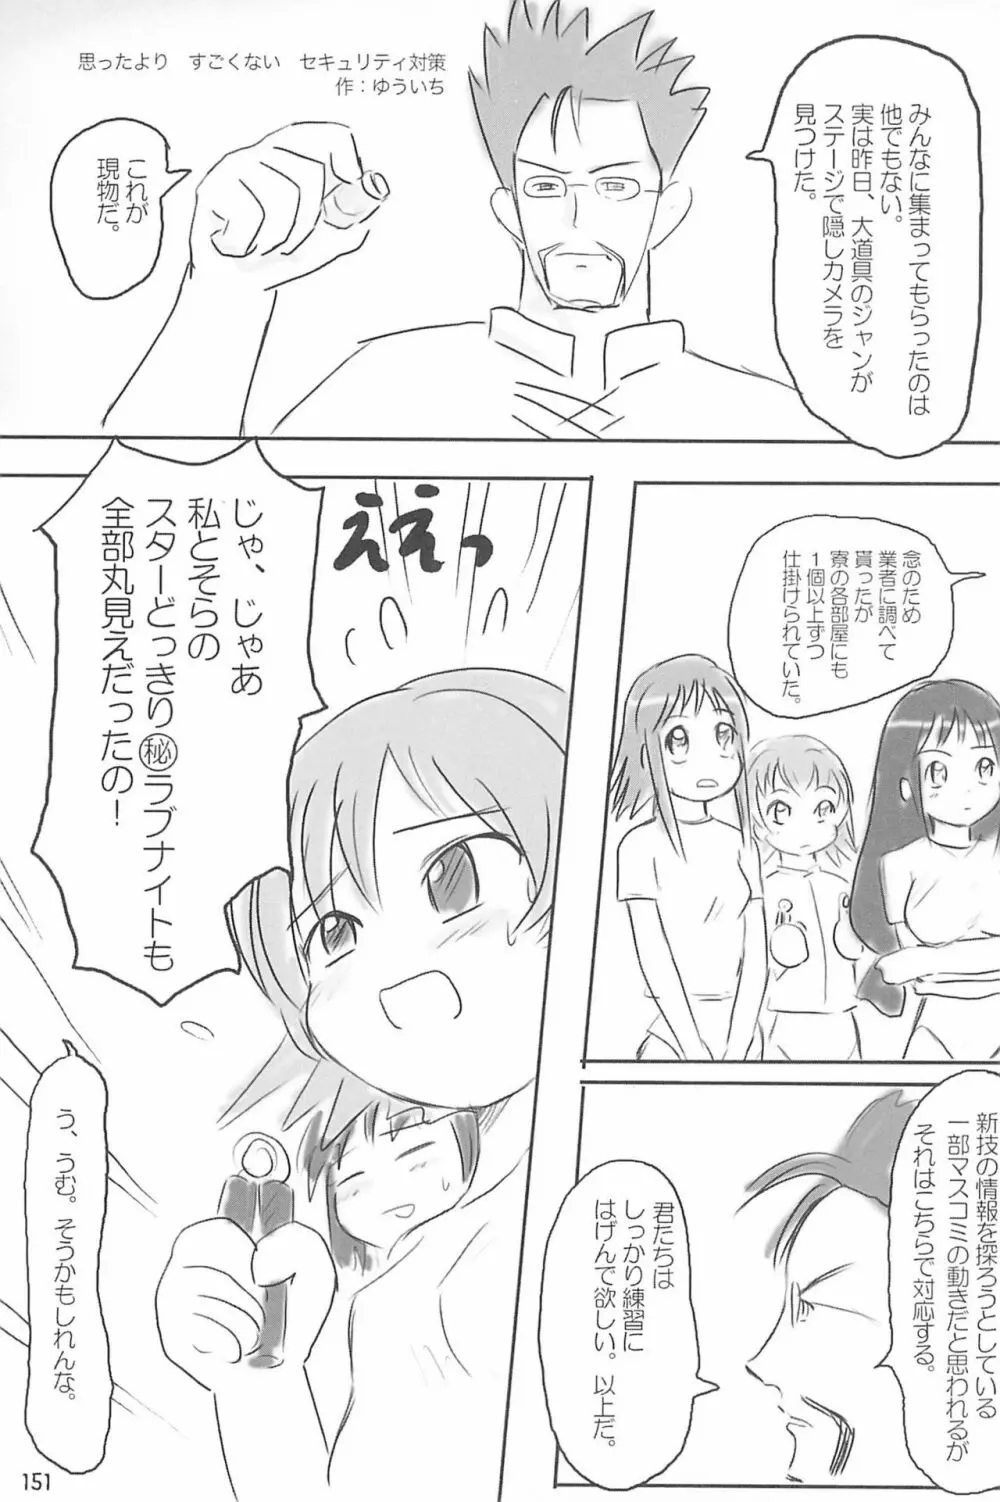 ND-special Volume 4 151ページ